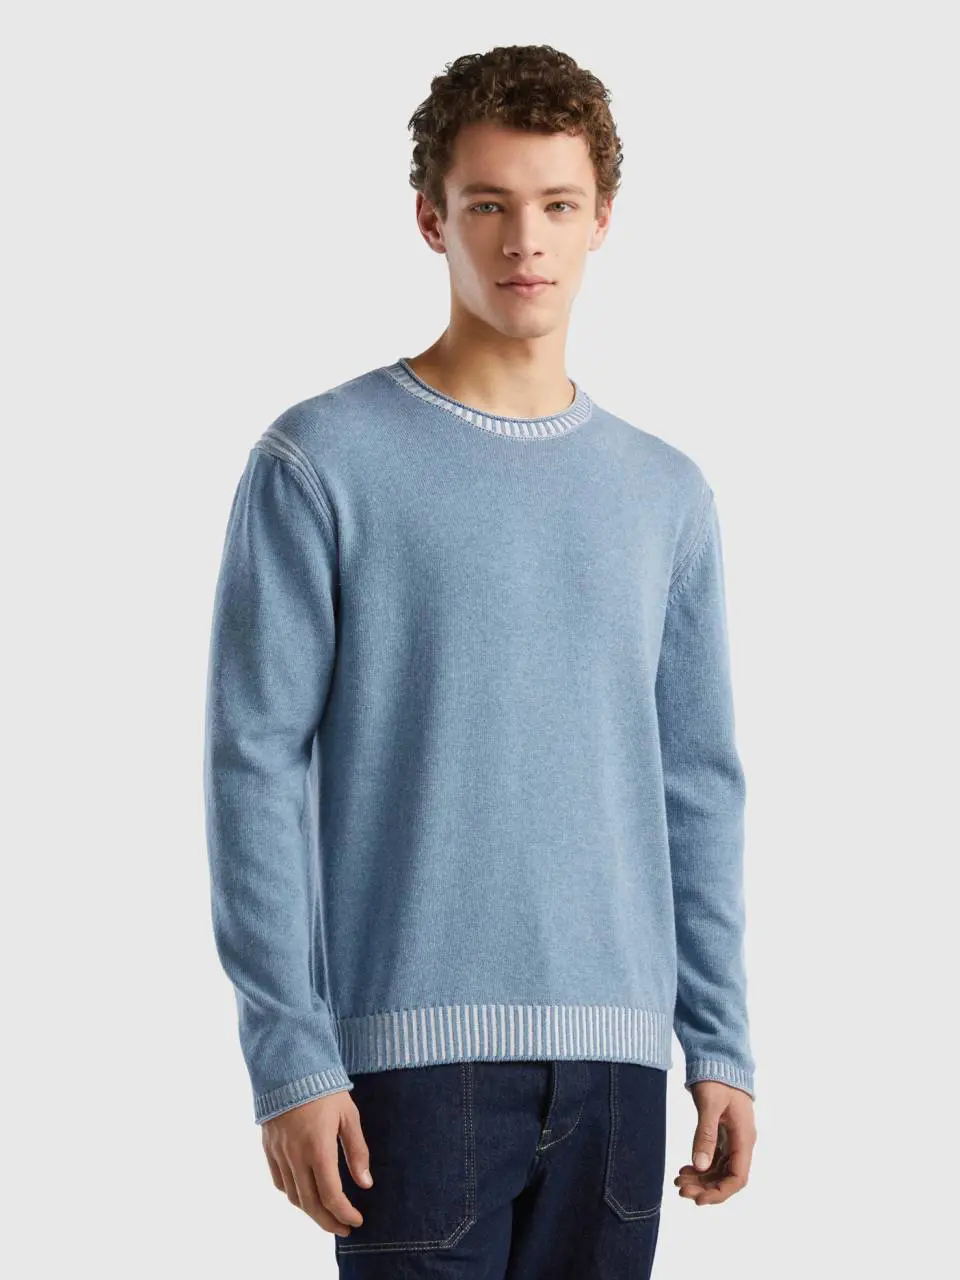 Benetton sweater in recycled cotton blend. 1